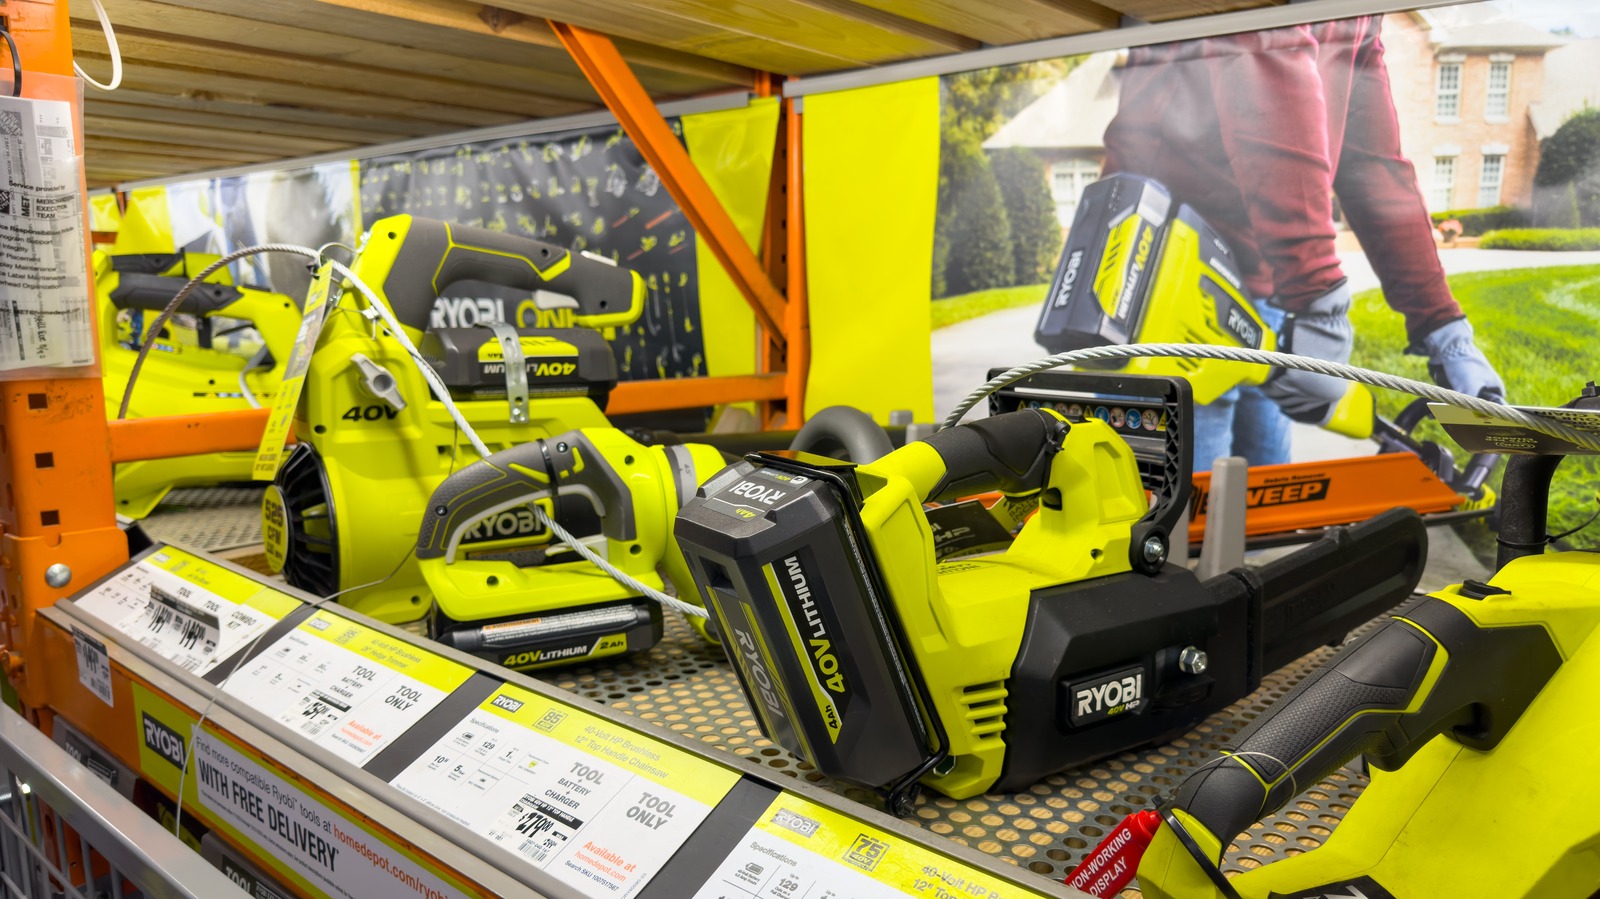 12 Ryobi Tools Ready To Help You Give Your Home A Deep Clean Inside And Out